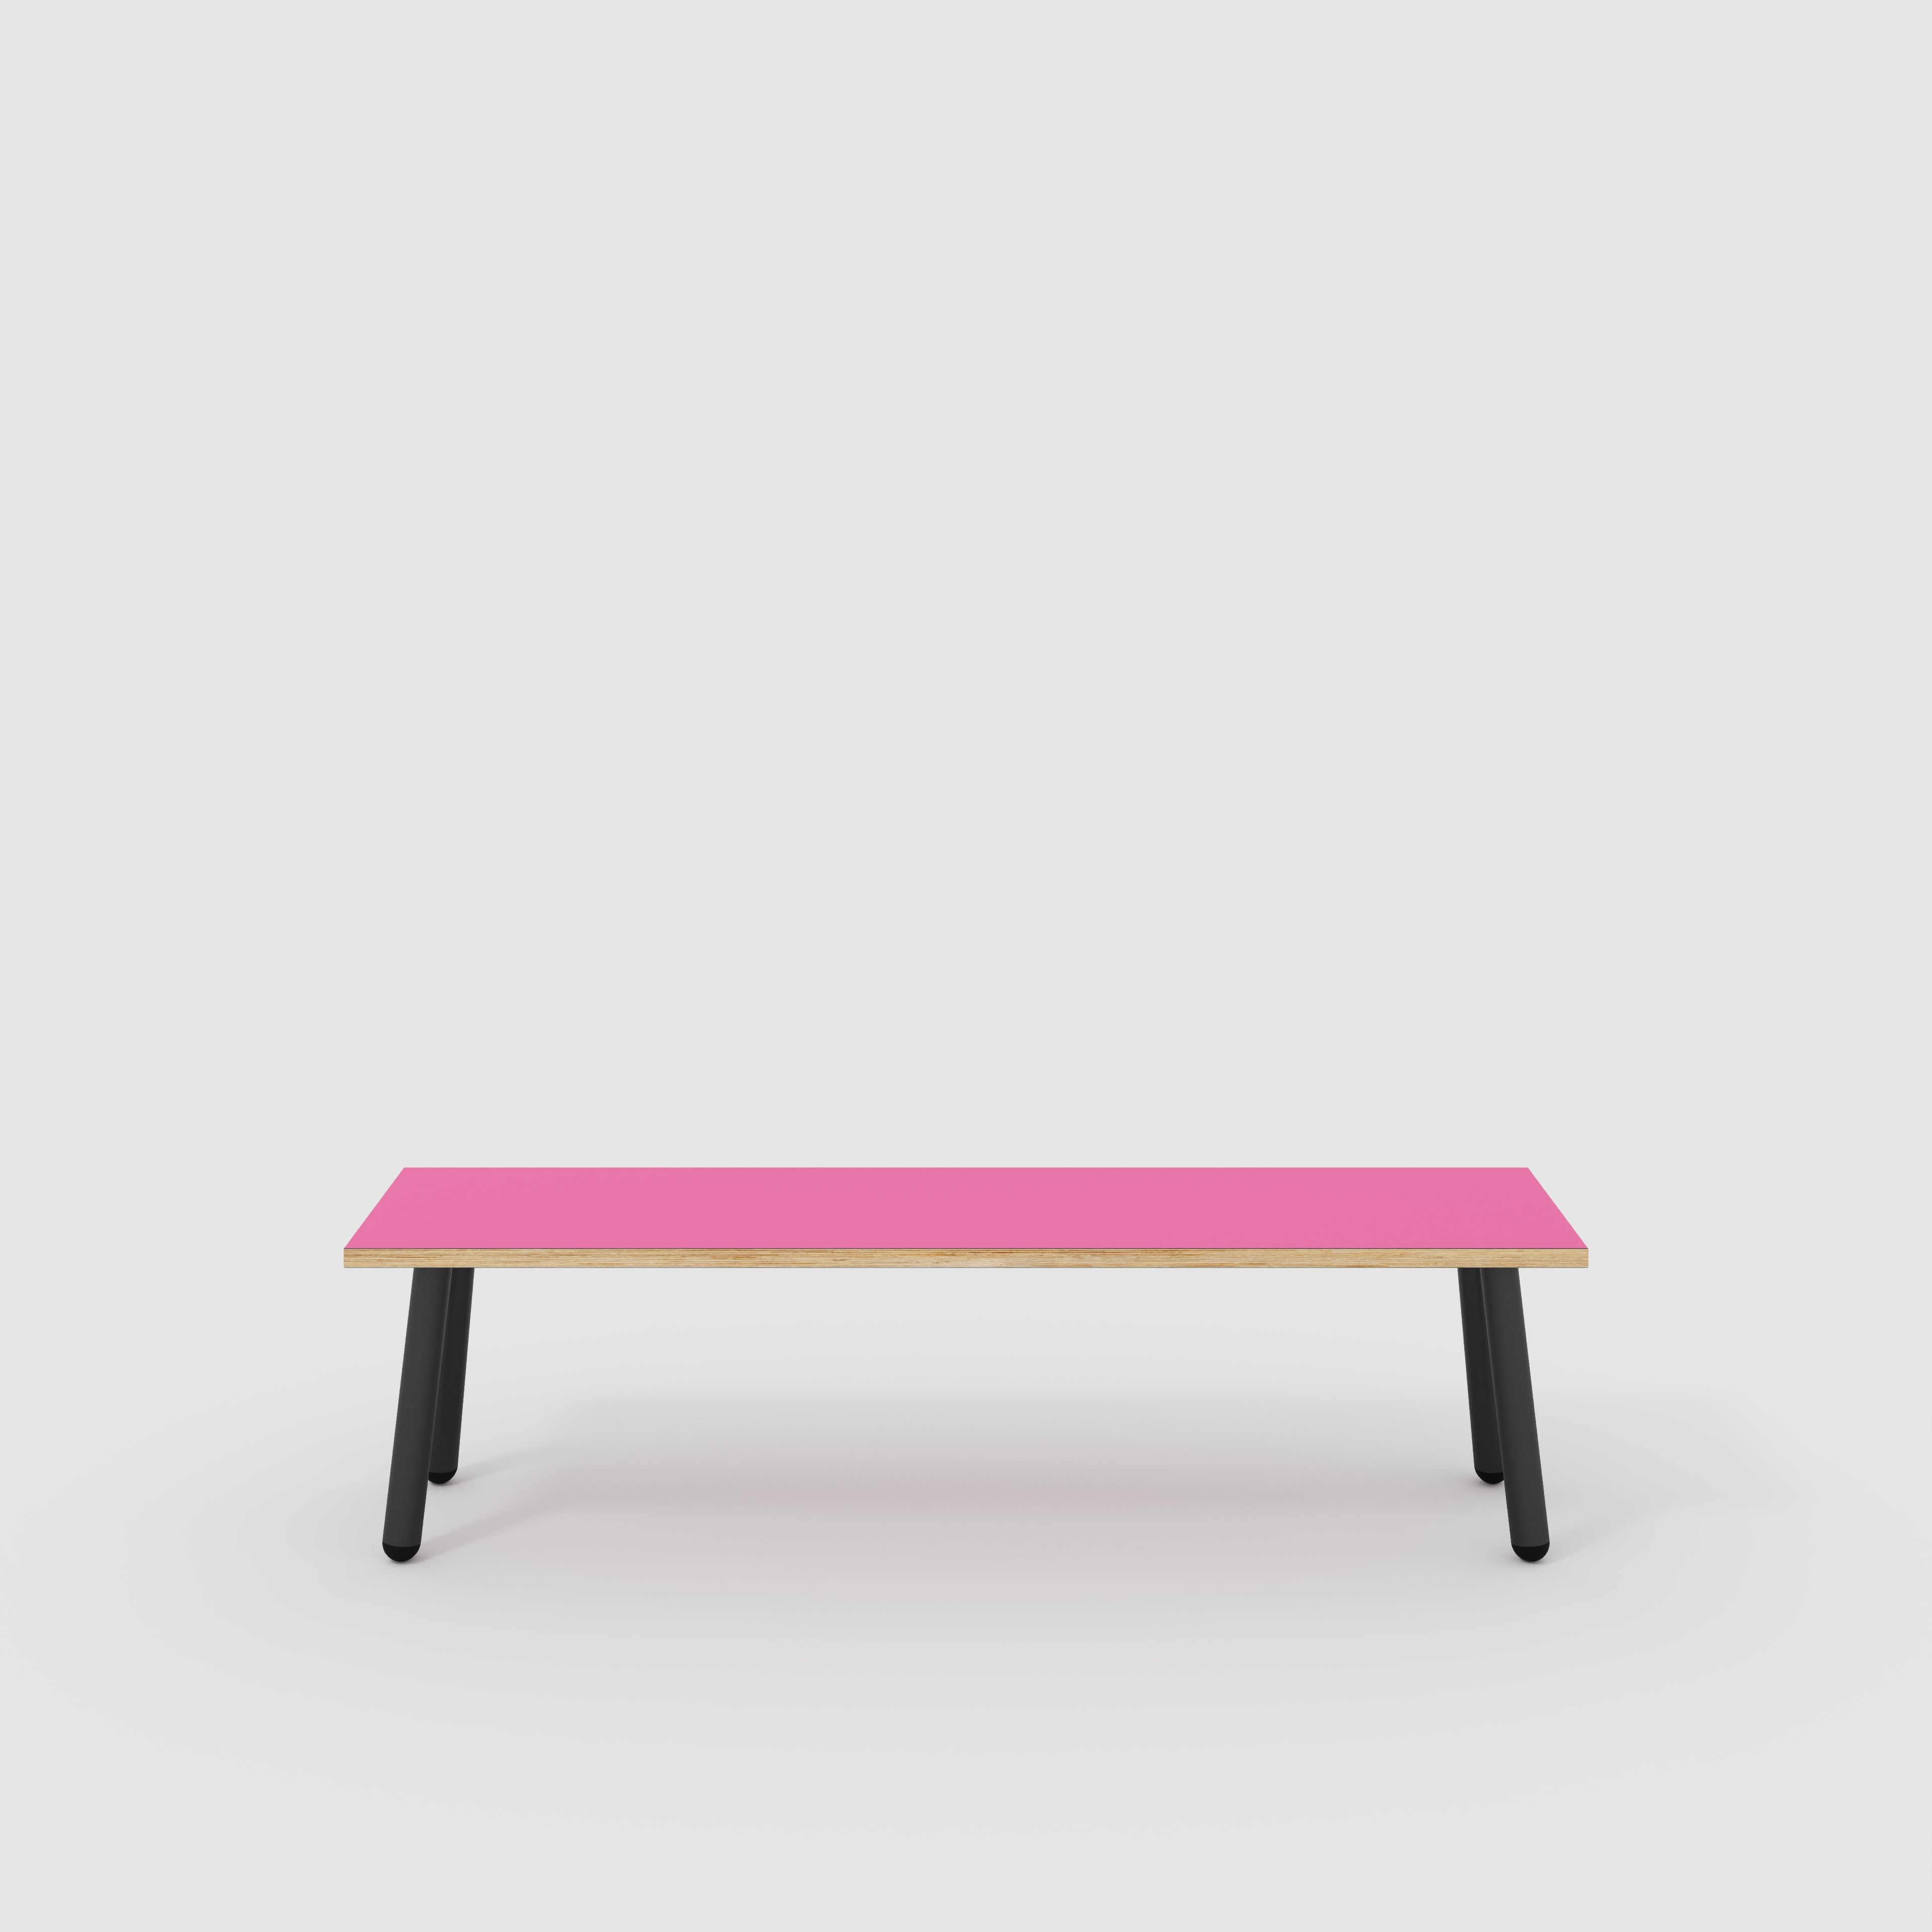 Bench Seat with Black Round Single Pin Legs - Formica Juicy Pink - 1600(w) x 400(d)